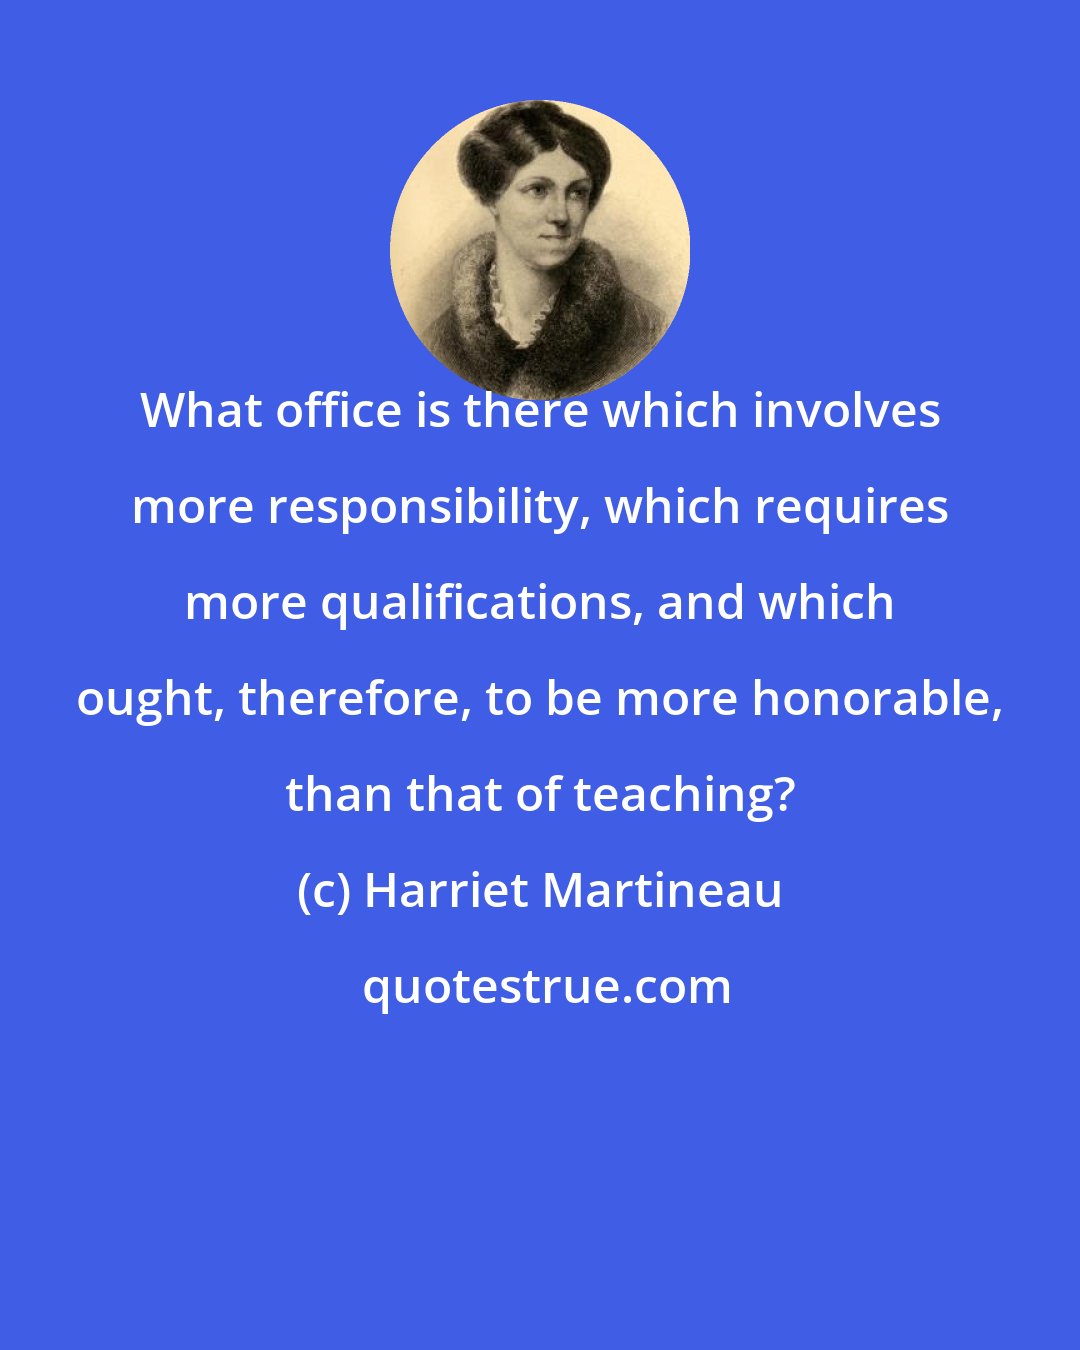 Harriet Martineau: What office is there which involves more responsibility, which requires more qualifications, and which ought, therefore, to be more honorable, than that of teaching?